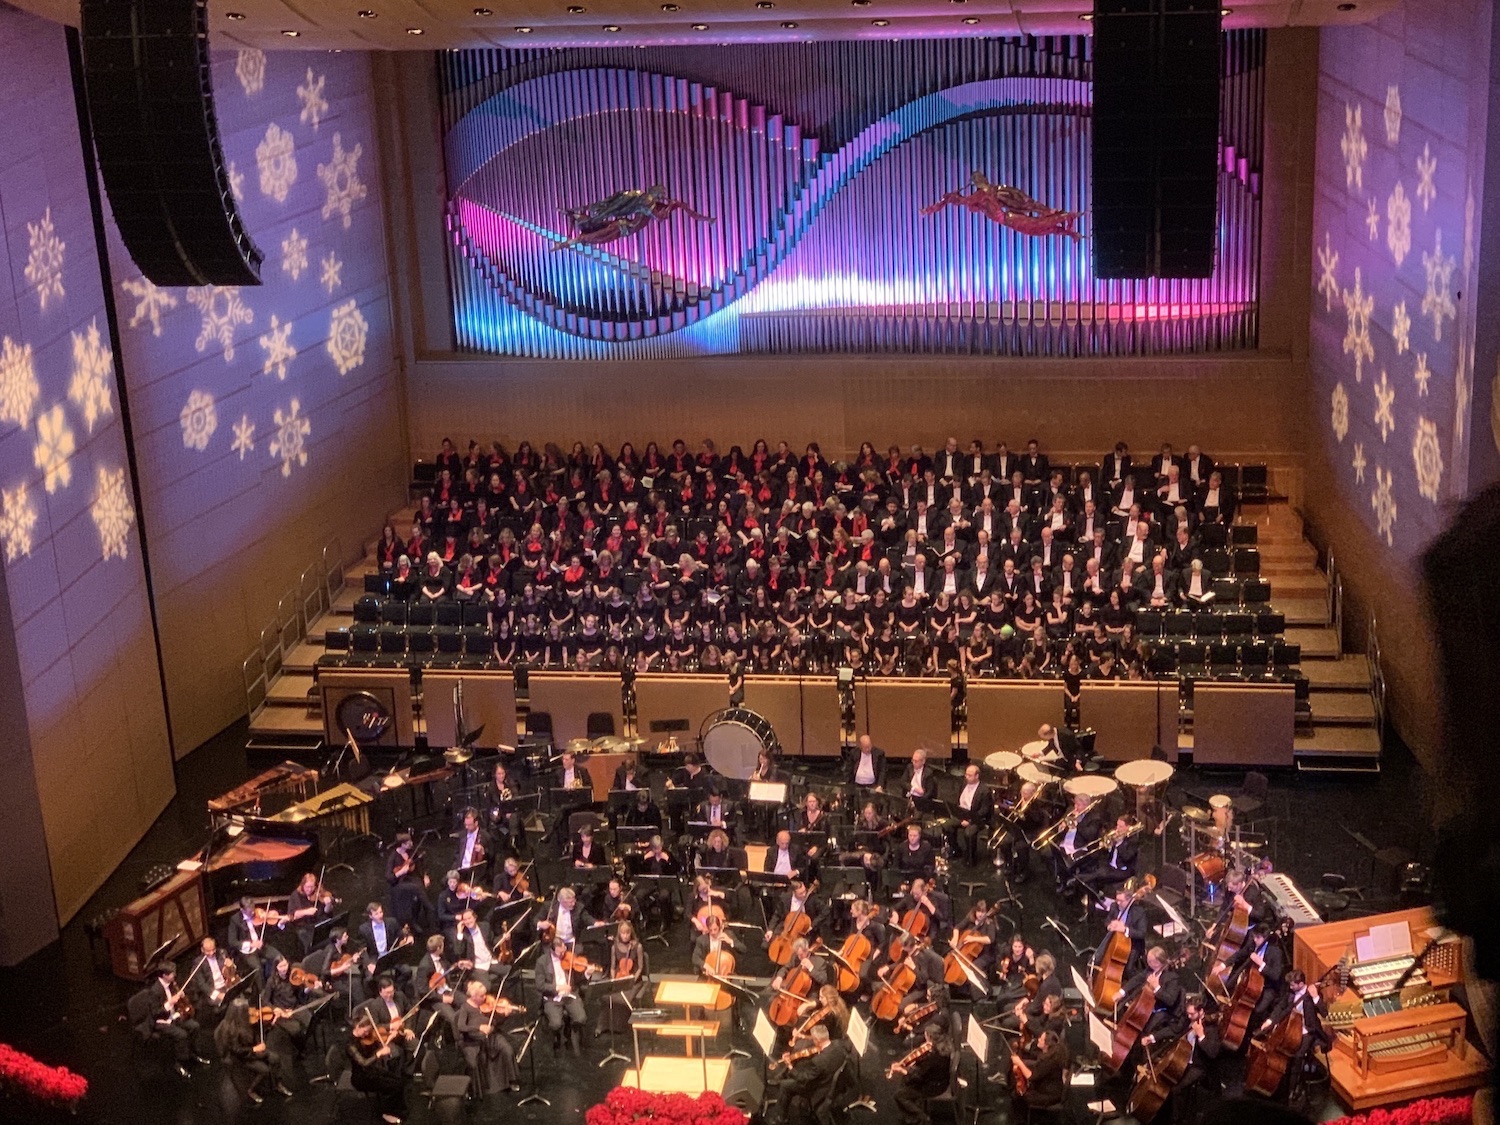 Holiday Concert At The Overture Center For The Arts